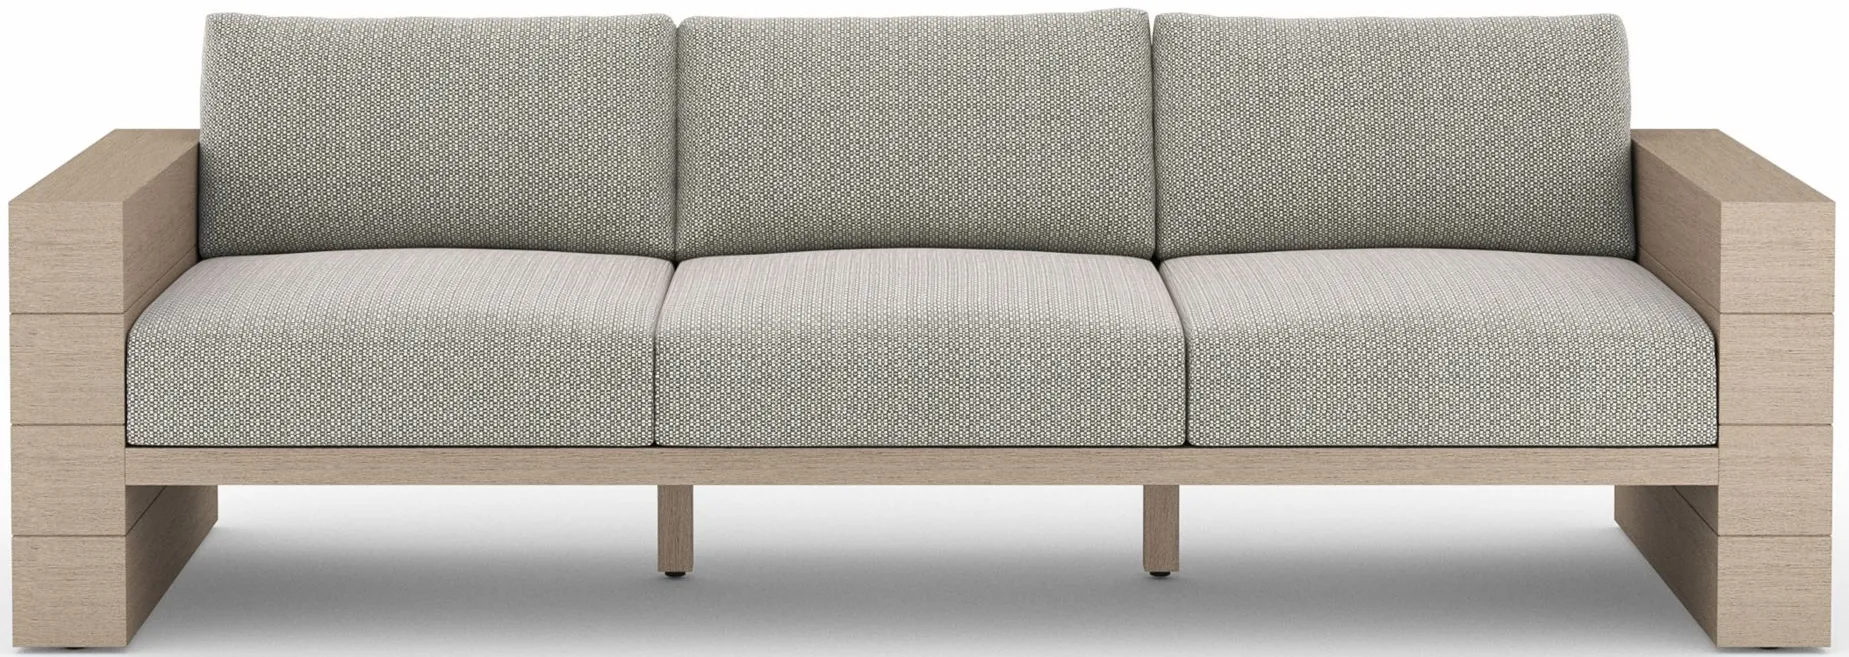 Leroy Outdoor Sofa in Faye Ash by Four Hands